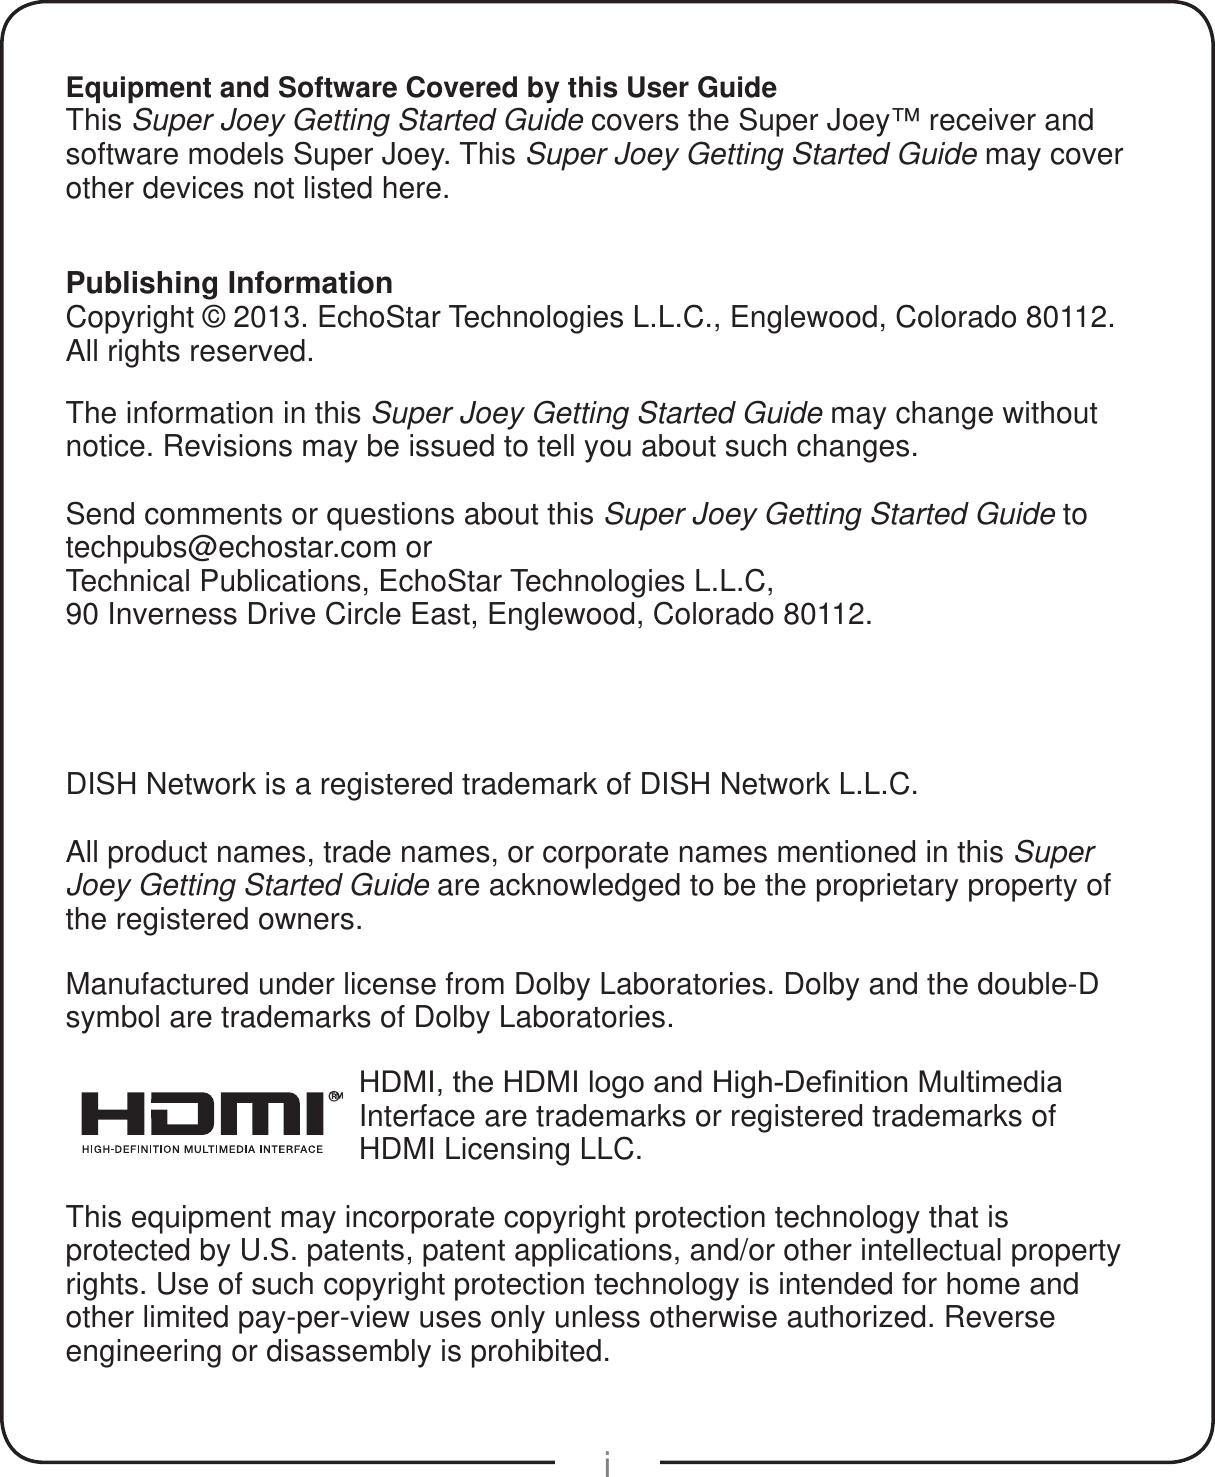 iEquipment and Software Covered by this User GuideThis Super Joey Getting Started Guide covers the Super Joey™ receiver and software models Super Joey. This Super Joey Getting Started Guide may cover other devices not listed here.Publishing InformationCopyright © 2013. EchoStar Technologies L.L.C., Englewood, Colorado 80112. All rights reserved.The information in this Super Joey Getting Started Guide may change without notice. Revisions may be issued to tell you about such changes.Send comments or questions about this Super Joey Getting Started Guide to  techpubs@echostar.com orTechnical Publications, EchoStar Technologies L.L.C, 90 Inverness Drive Circle East, Englewood, Colorado 80112.DISH Network is a registered trademark of DISH Network L.L.C.All product names, trade names, or corporate names mentioned in this Super Joey Getting Started Guide are acknowledged to be the proprietary property of the registered owners.Manufactured under license from Dolby Laboratories. Dolby and the double-D symbol are trademarks of Dolby Laboratories.®+&apos;0,WKH+&apos;0,ORJRDQG+LJK&apos;H¿QLWLRQ0XOWLPHGLDInterface are trademarks or registered trademarks of HDMI Licensing LLC.This equipment may incorporate copyright protection technology that is protected by U.S. patents, patent applications, and/or other intellectual property rights. Use of such copyright protection technology is intended for home and other limited pay-per-view uses only unless otherwise authorized. Reverse engineering or disassembly is prohibited.